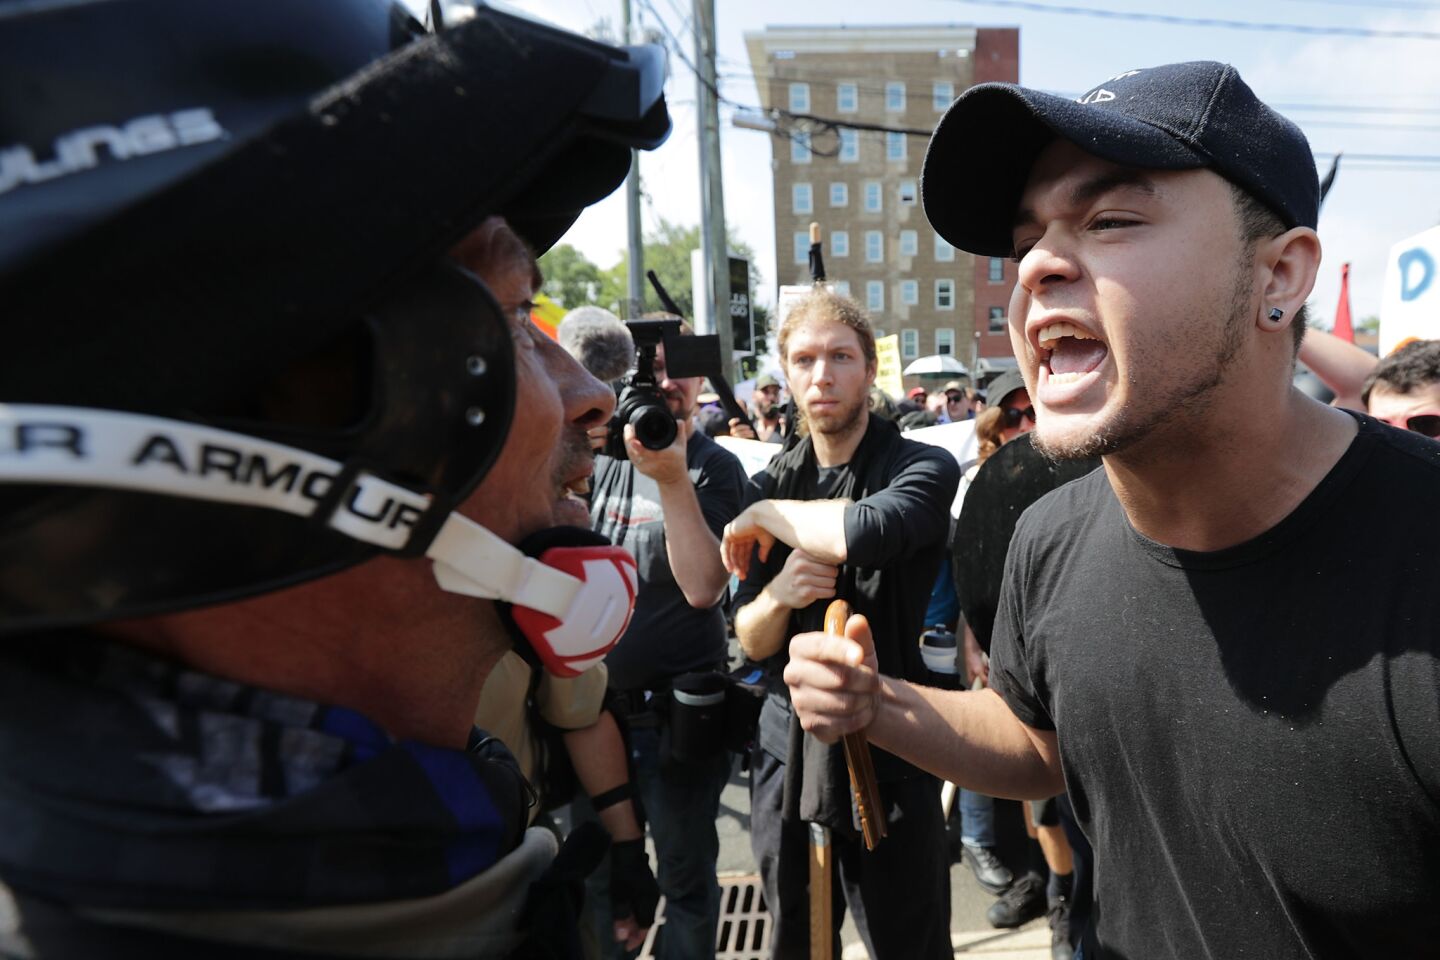 White nationalist rally leads to state of emergency